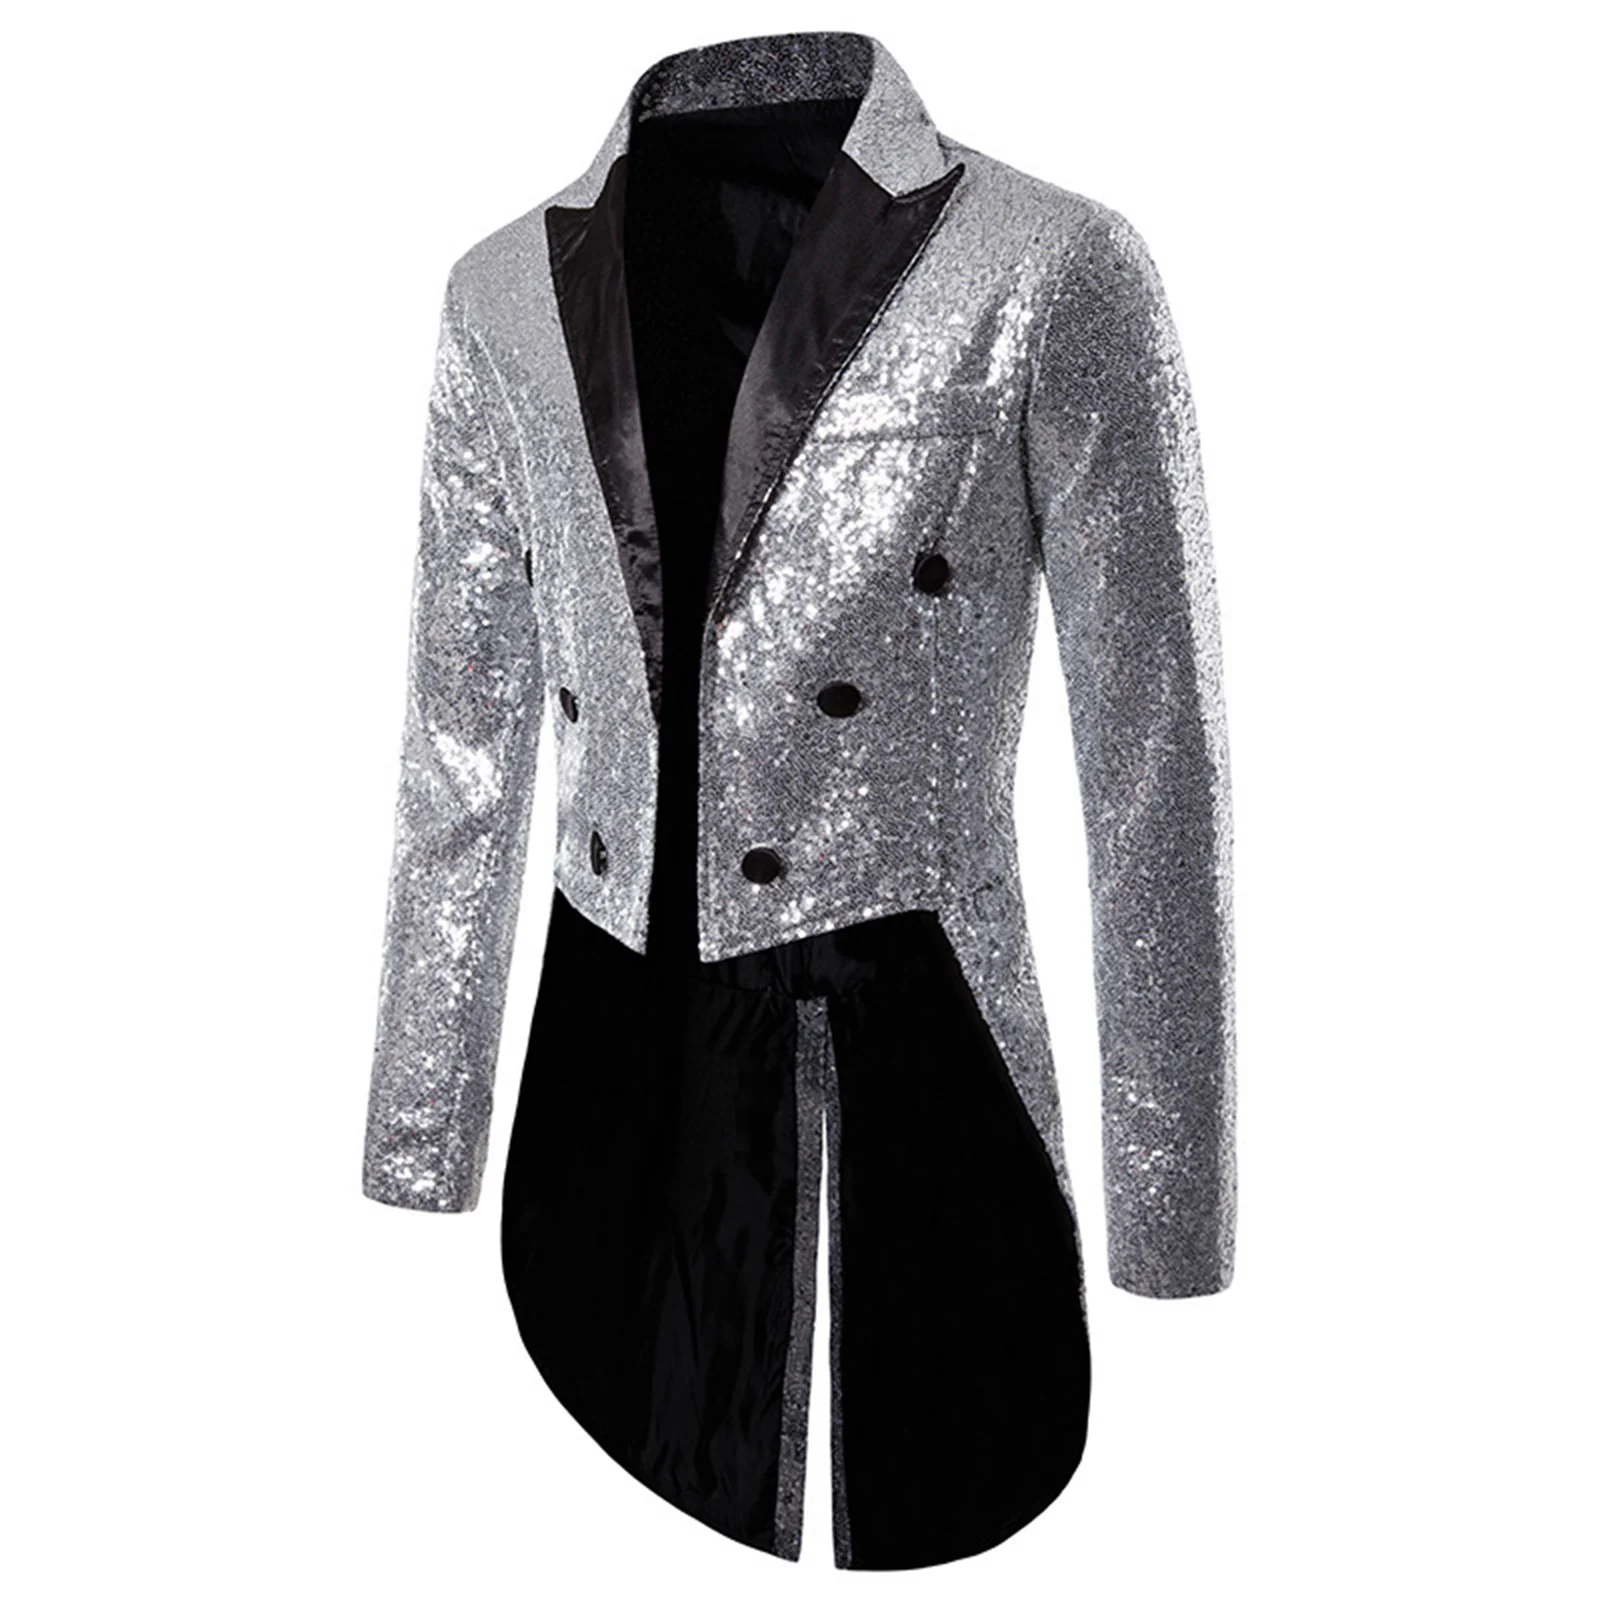 

Men Suits Blazer Sequin Tuxedo Top Dance Long Sleeve Formal Dress Coat Host Evening Party Wedding Swallowtail Tailcoat for Males